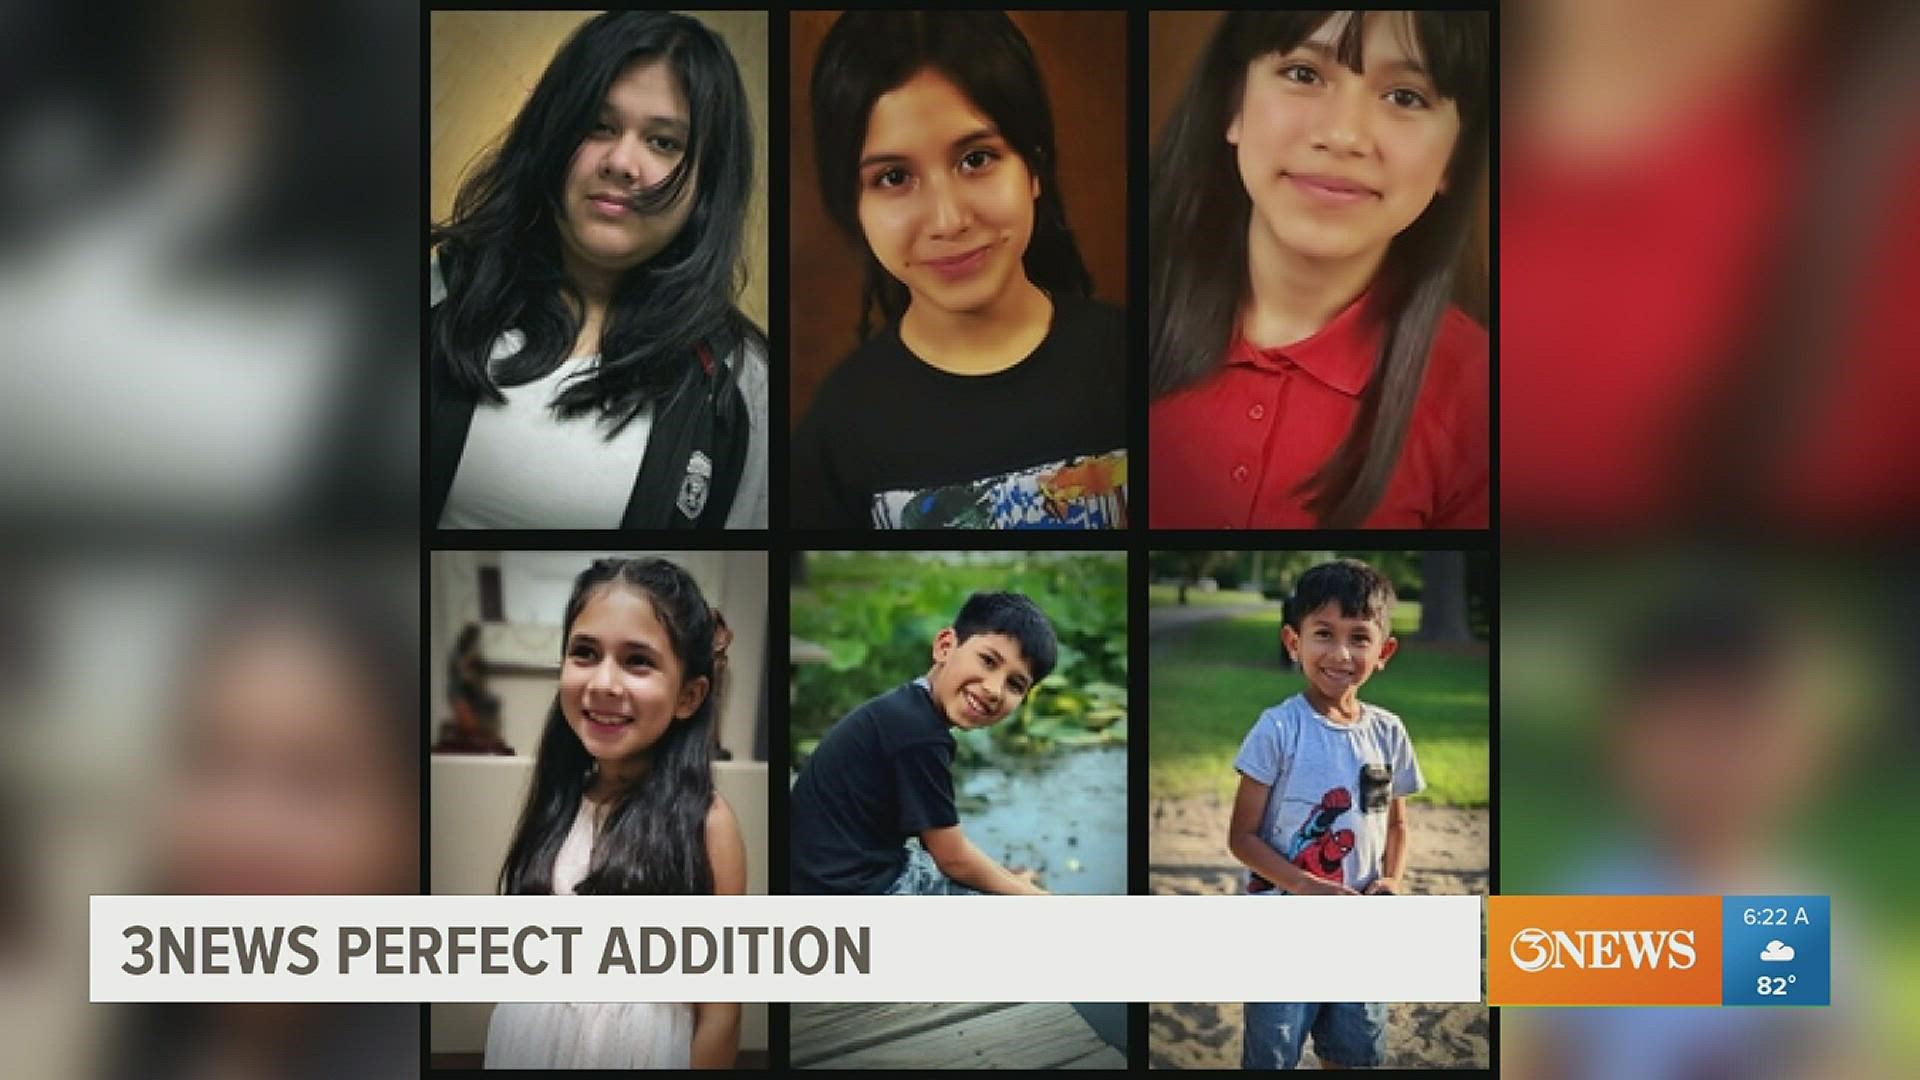 Mya, Alinah, Jenissa, Andrea, Martin, and Mathew, are an amazing sibling group that would love to be adopted together.